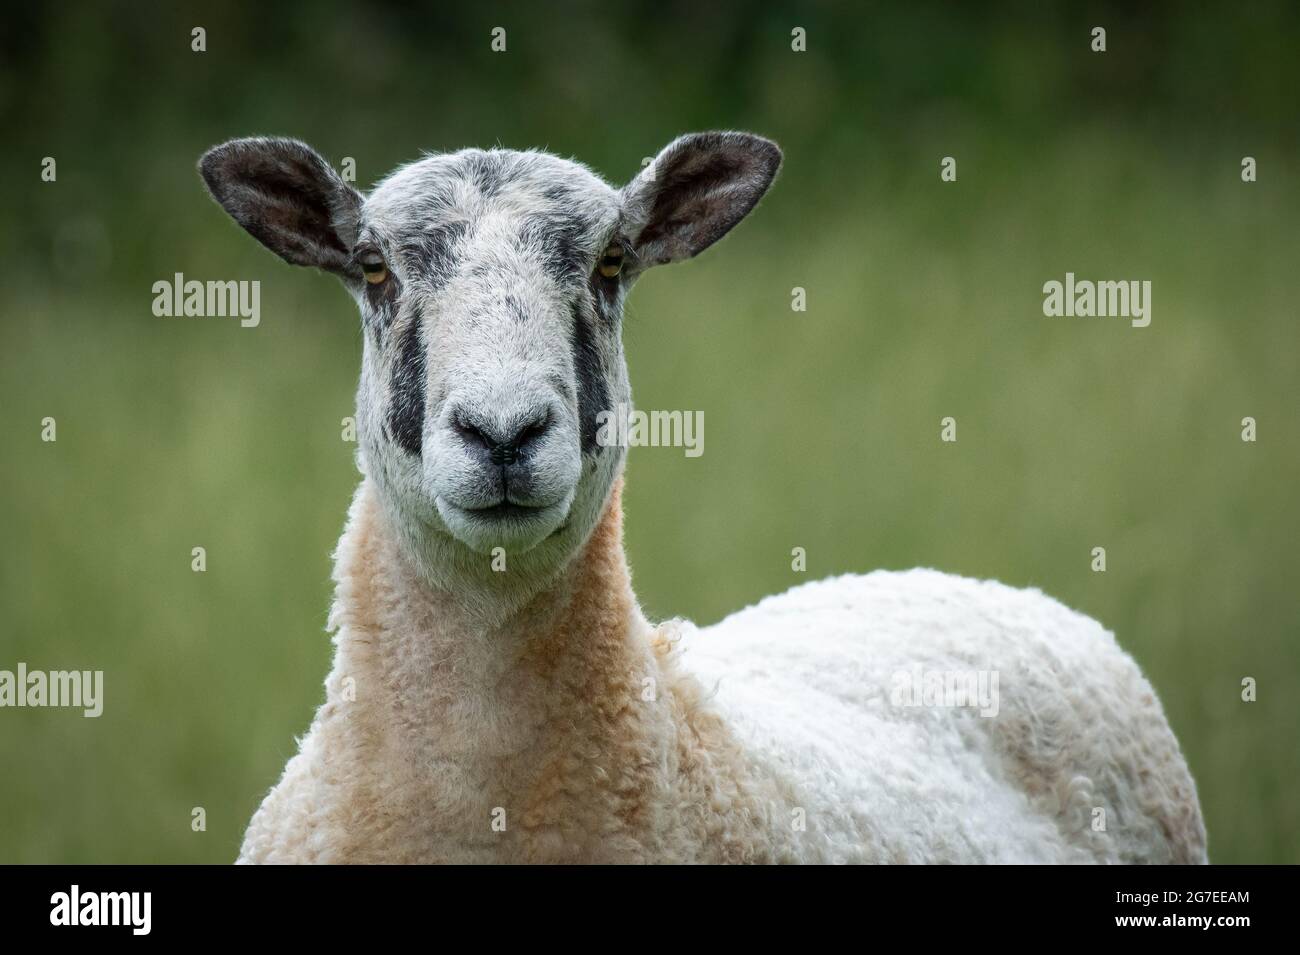 A very close portrait of a shawn sheep. It is facing forward and looking at the camera Stock Photo